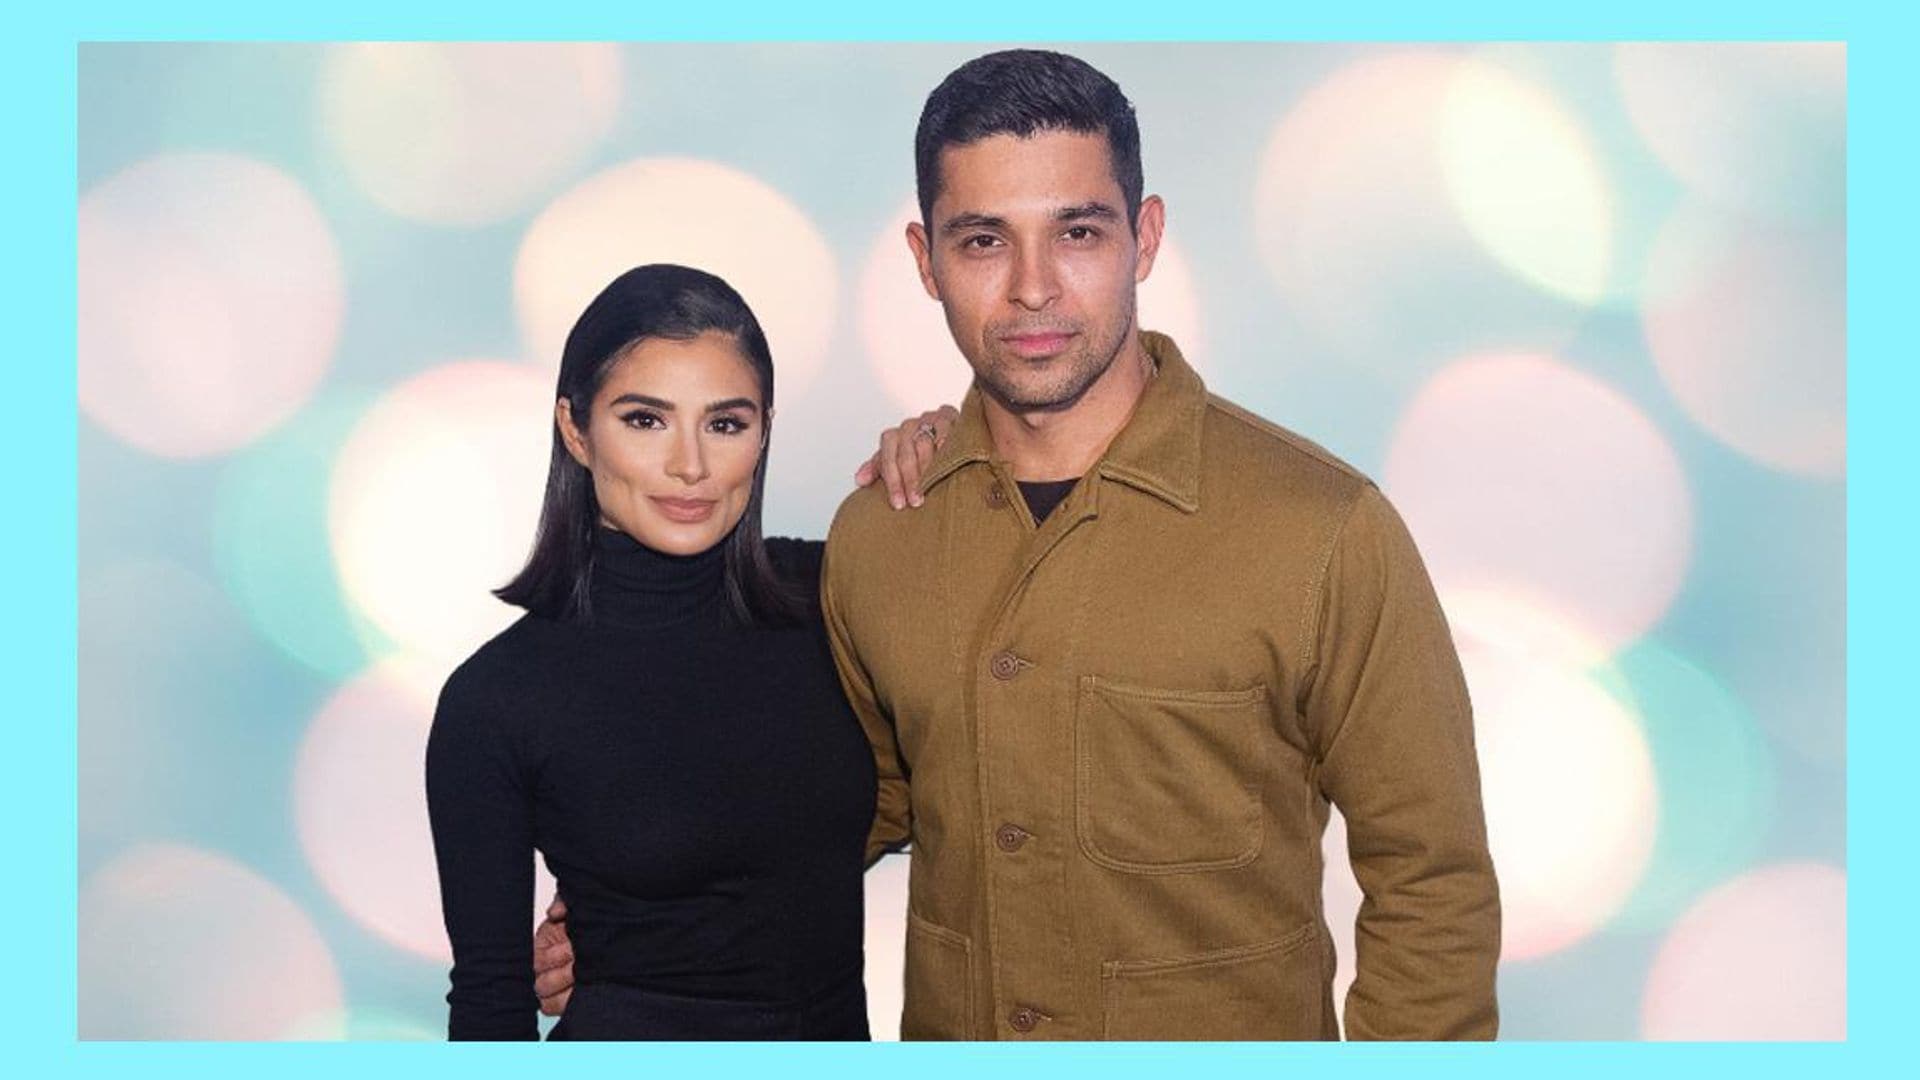 Diane Guerrero and Wilmer Valderrama are amplifying stories that change hearts and educate minds